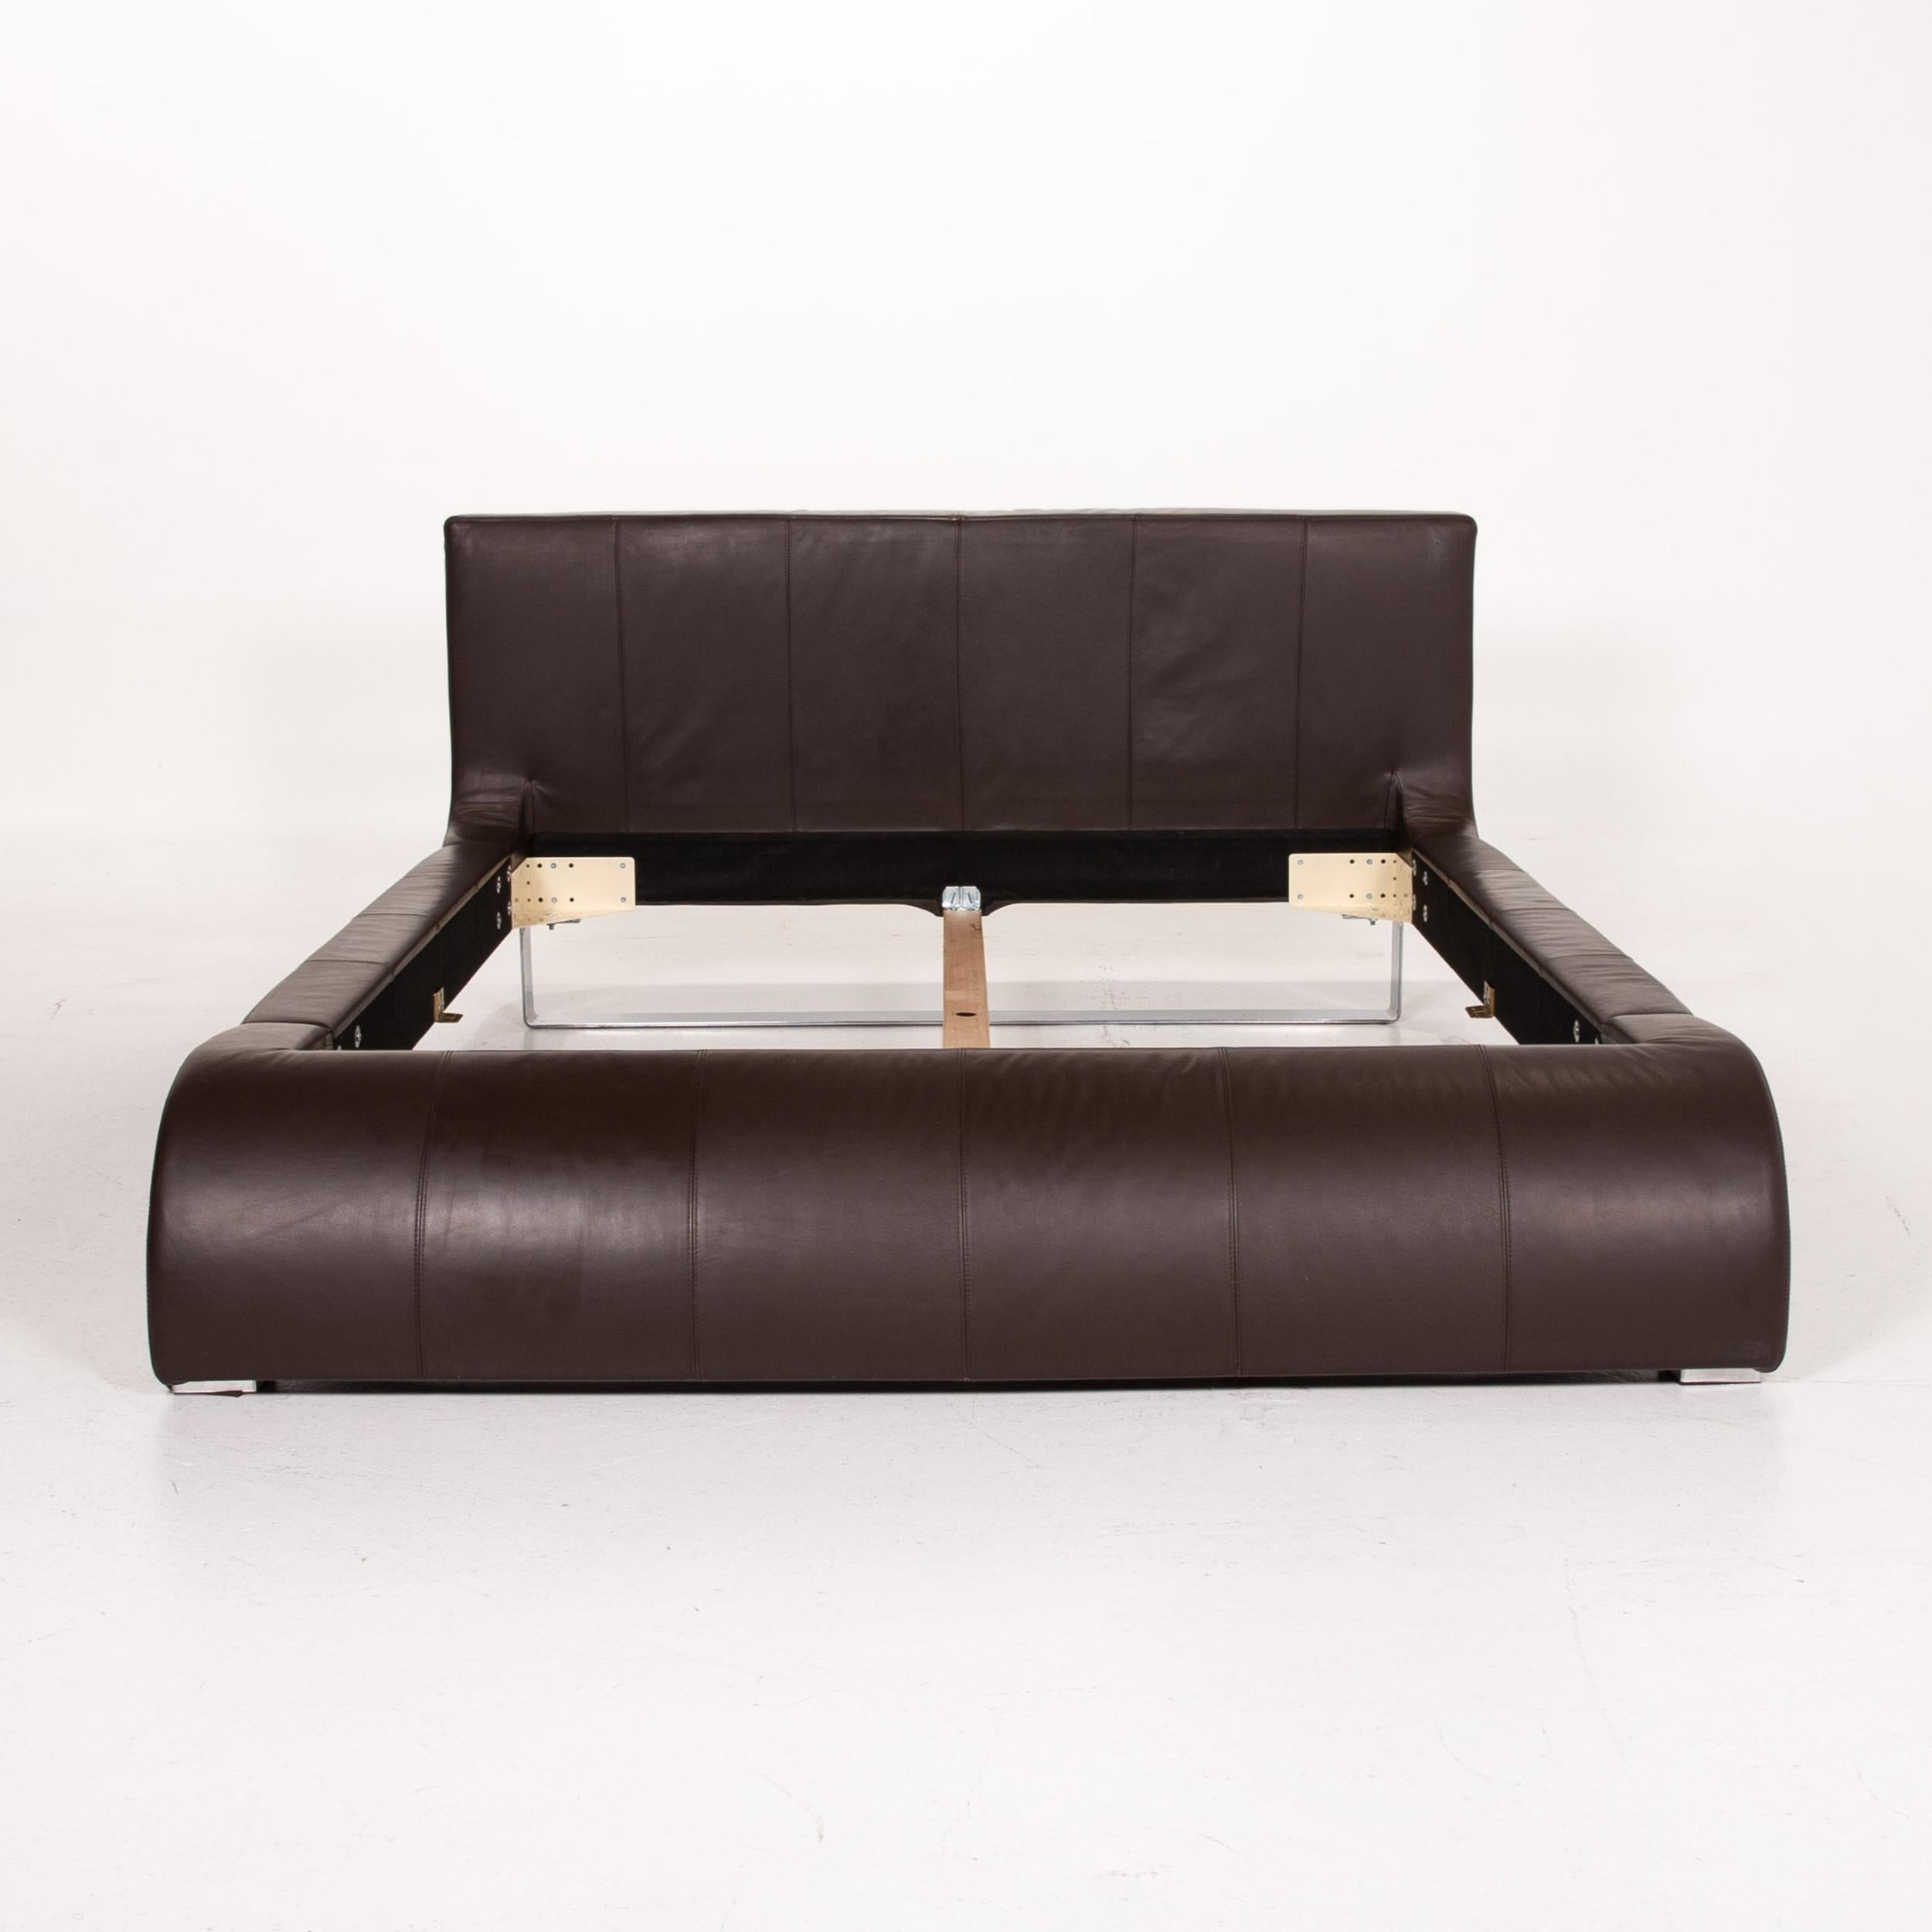 Joop! Swing Leather Double Bed Brown Dark Brown Bed In Good Condition For Sale In Cologne, DE